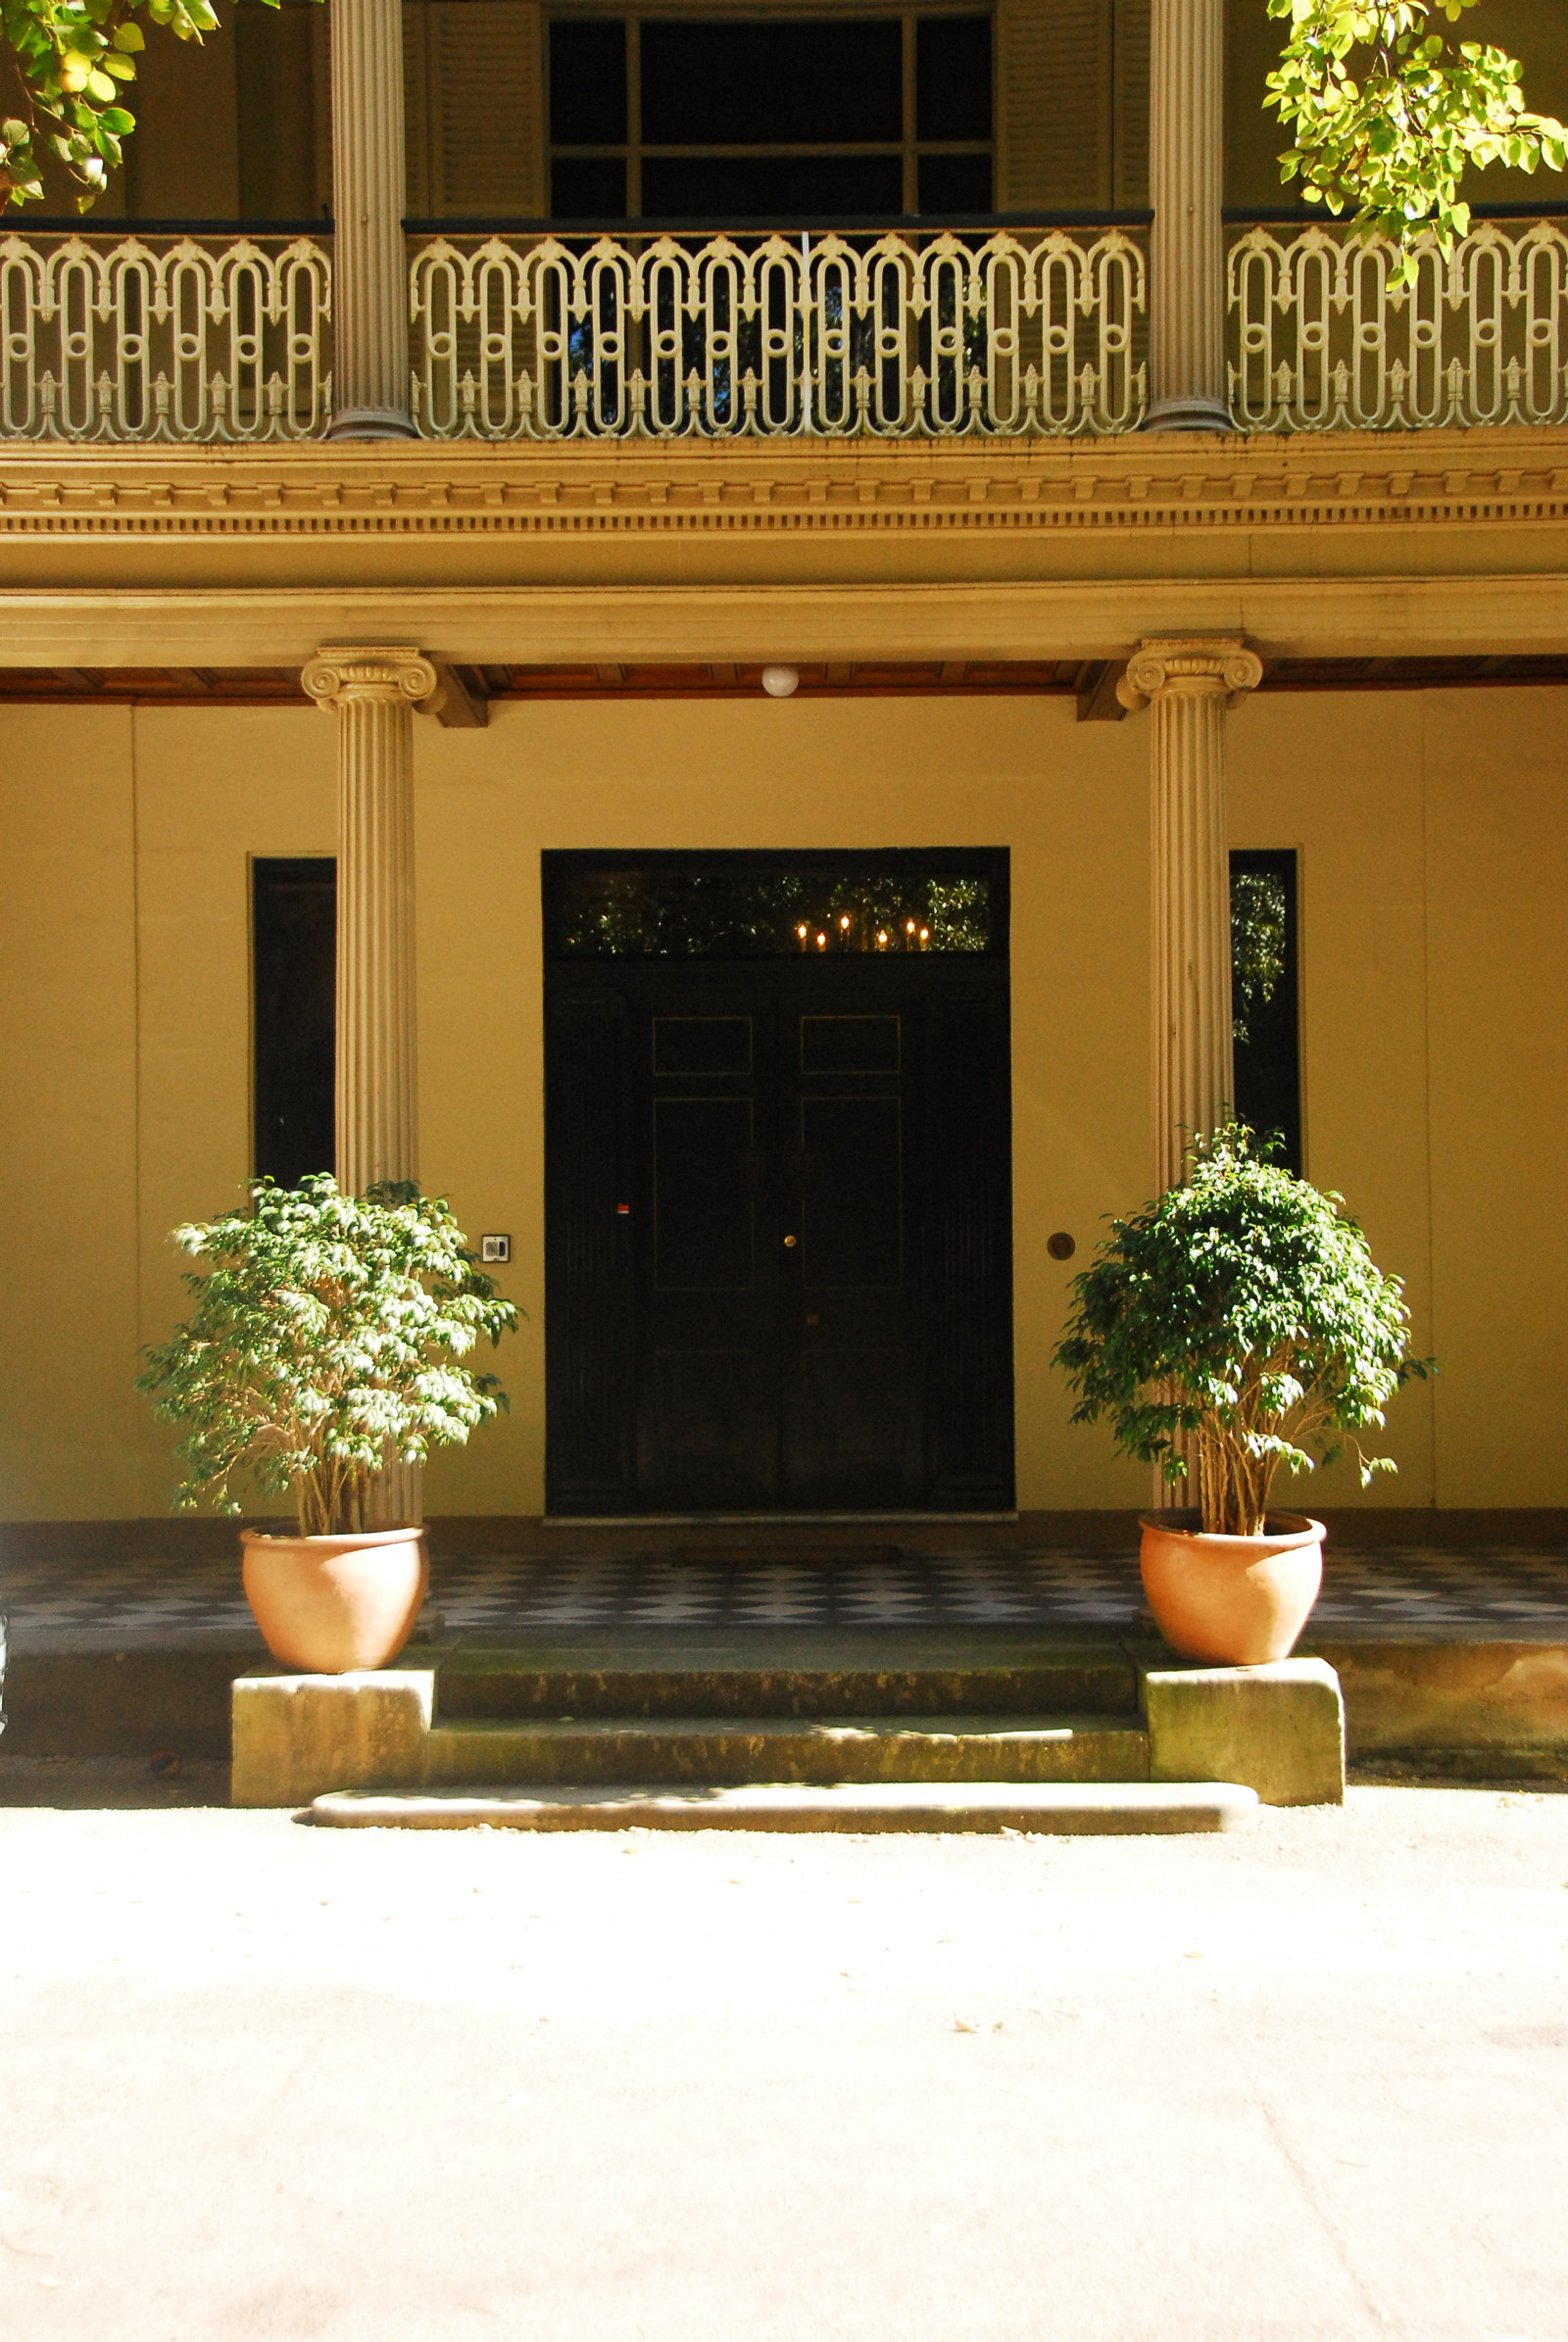 Front entrance to building flanked by columns, with two matching bushes in pots in front.